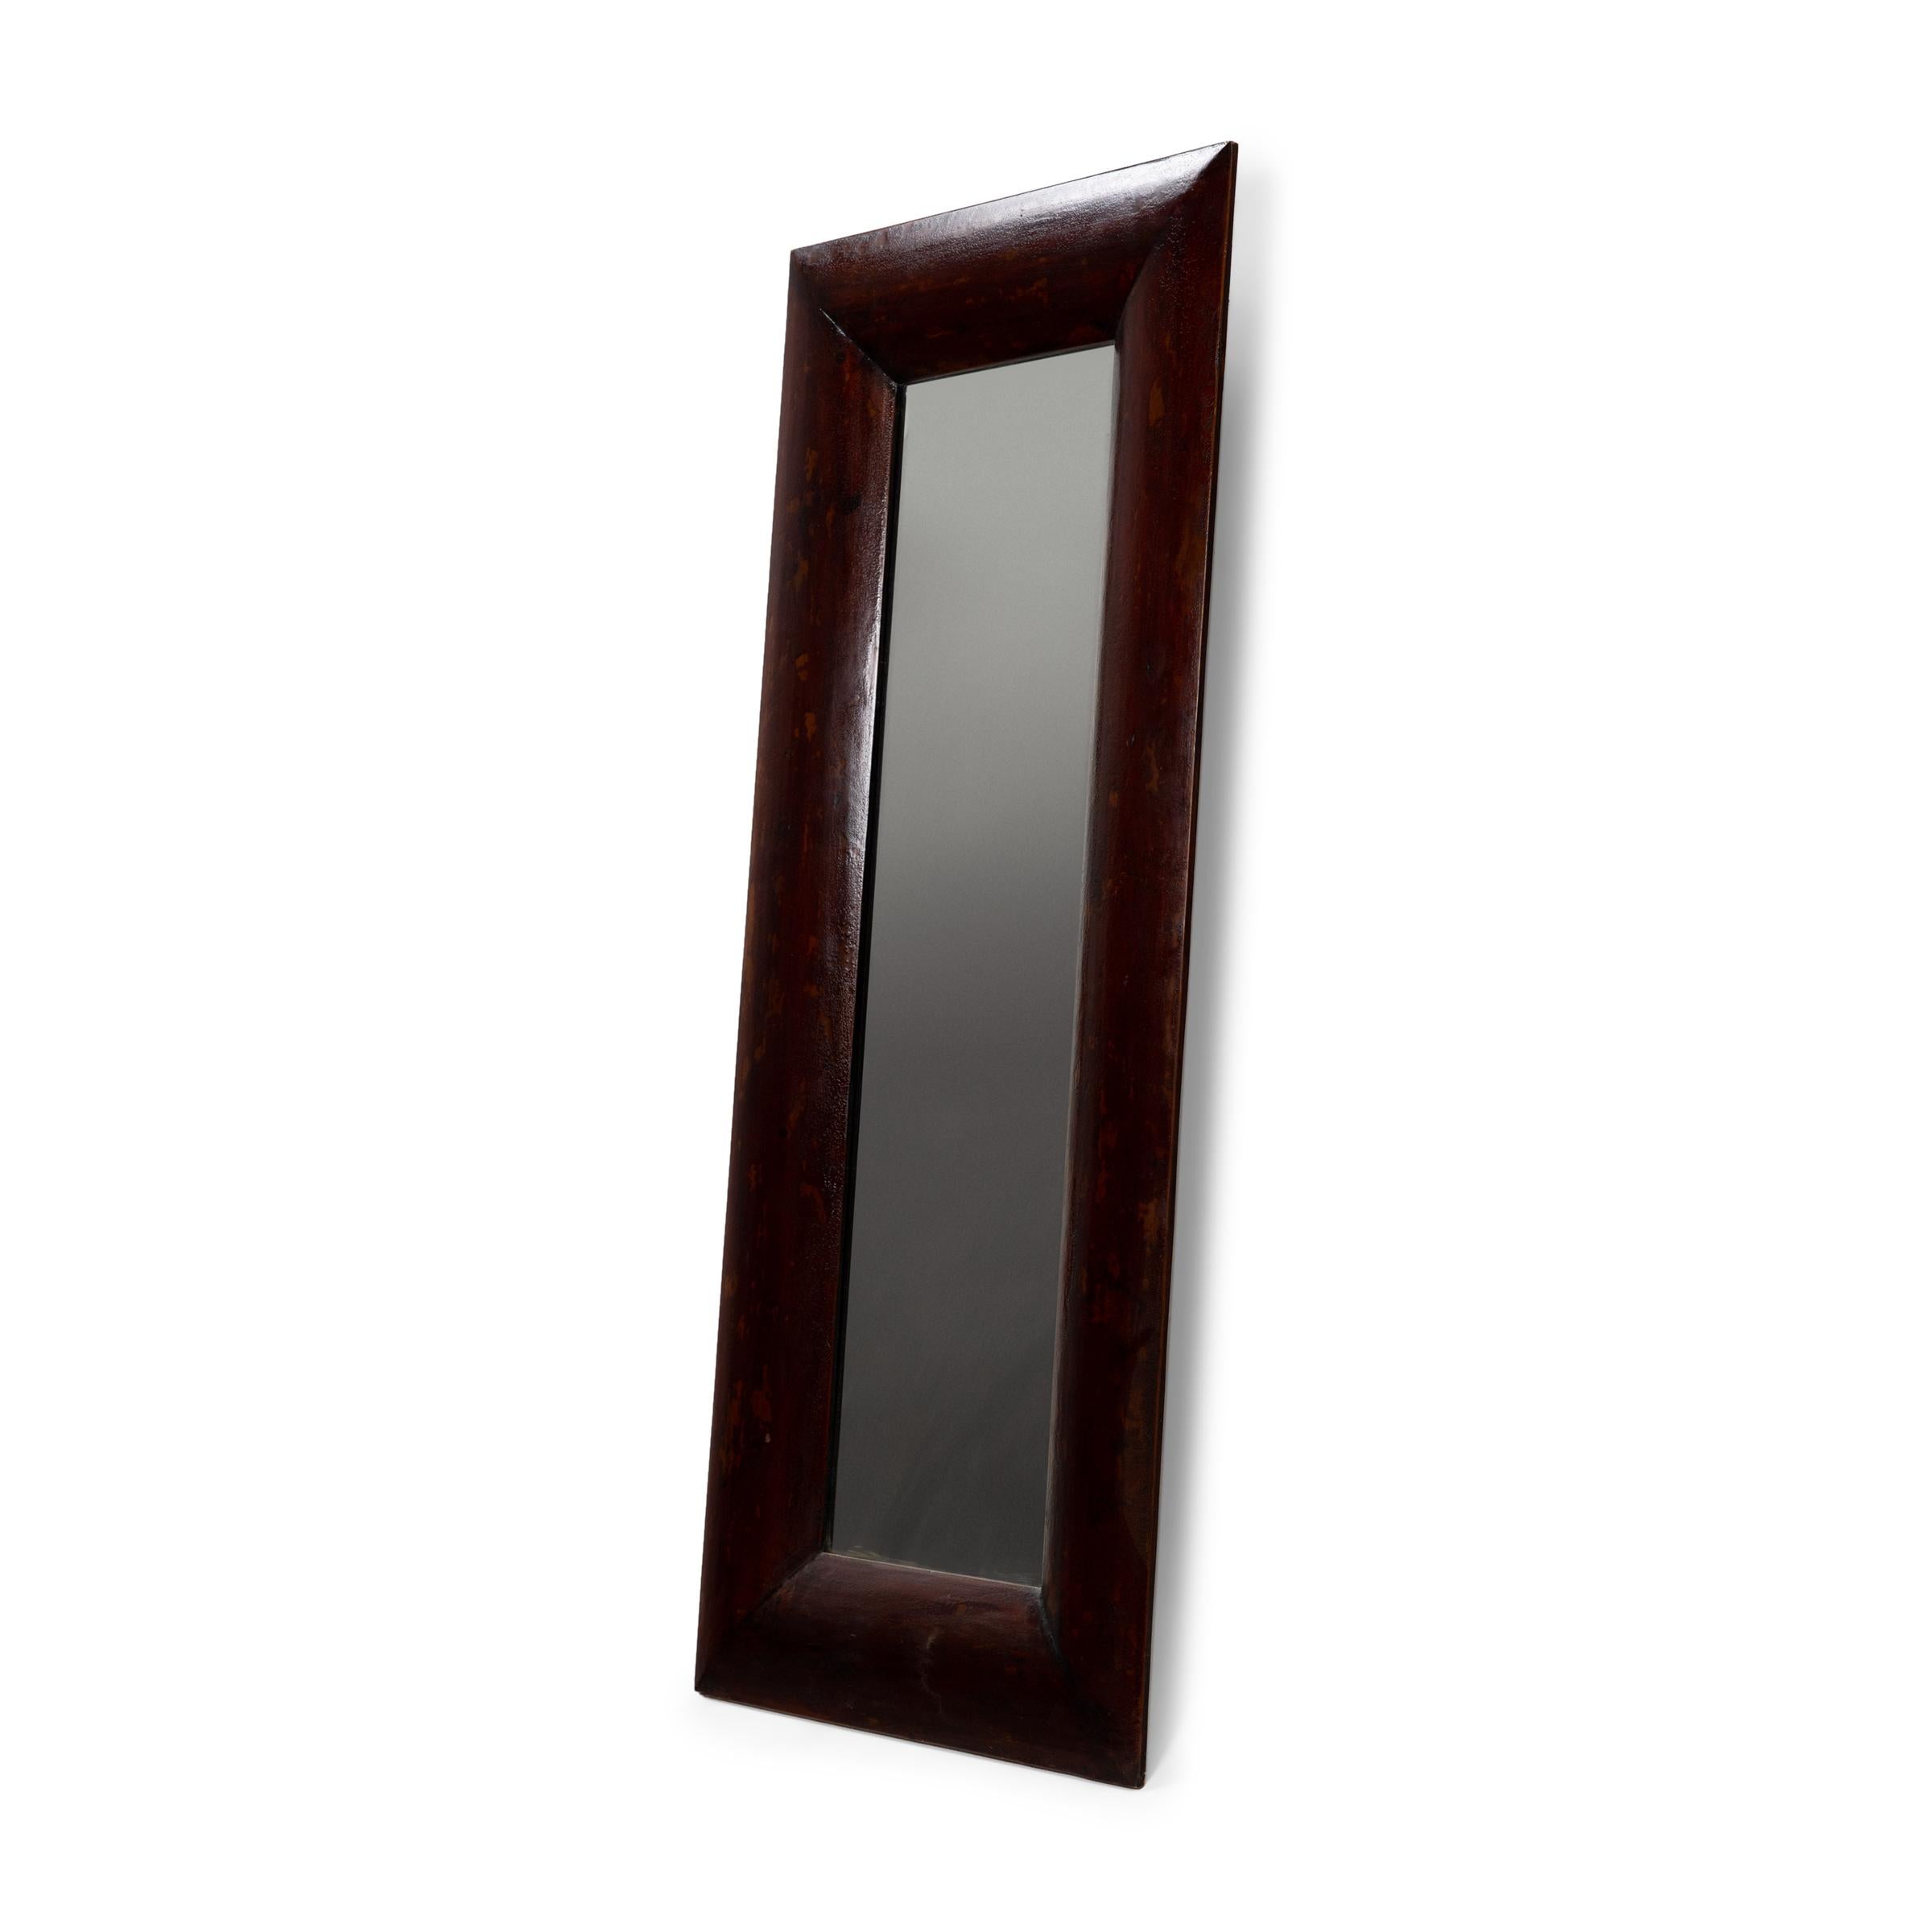 This tall rectangular mirror features a simple wooden frame with a rich, brown-red lacquer finish. Lightly crackled and textured from years of use, we love this Chinese floor mirror for its elegant shape and minimalist construction.